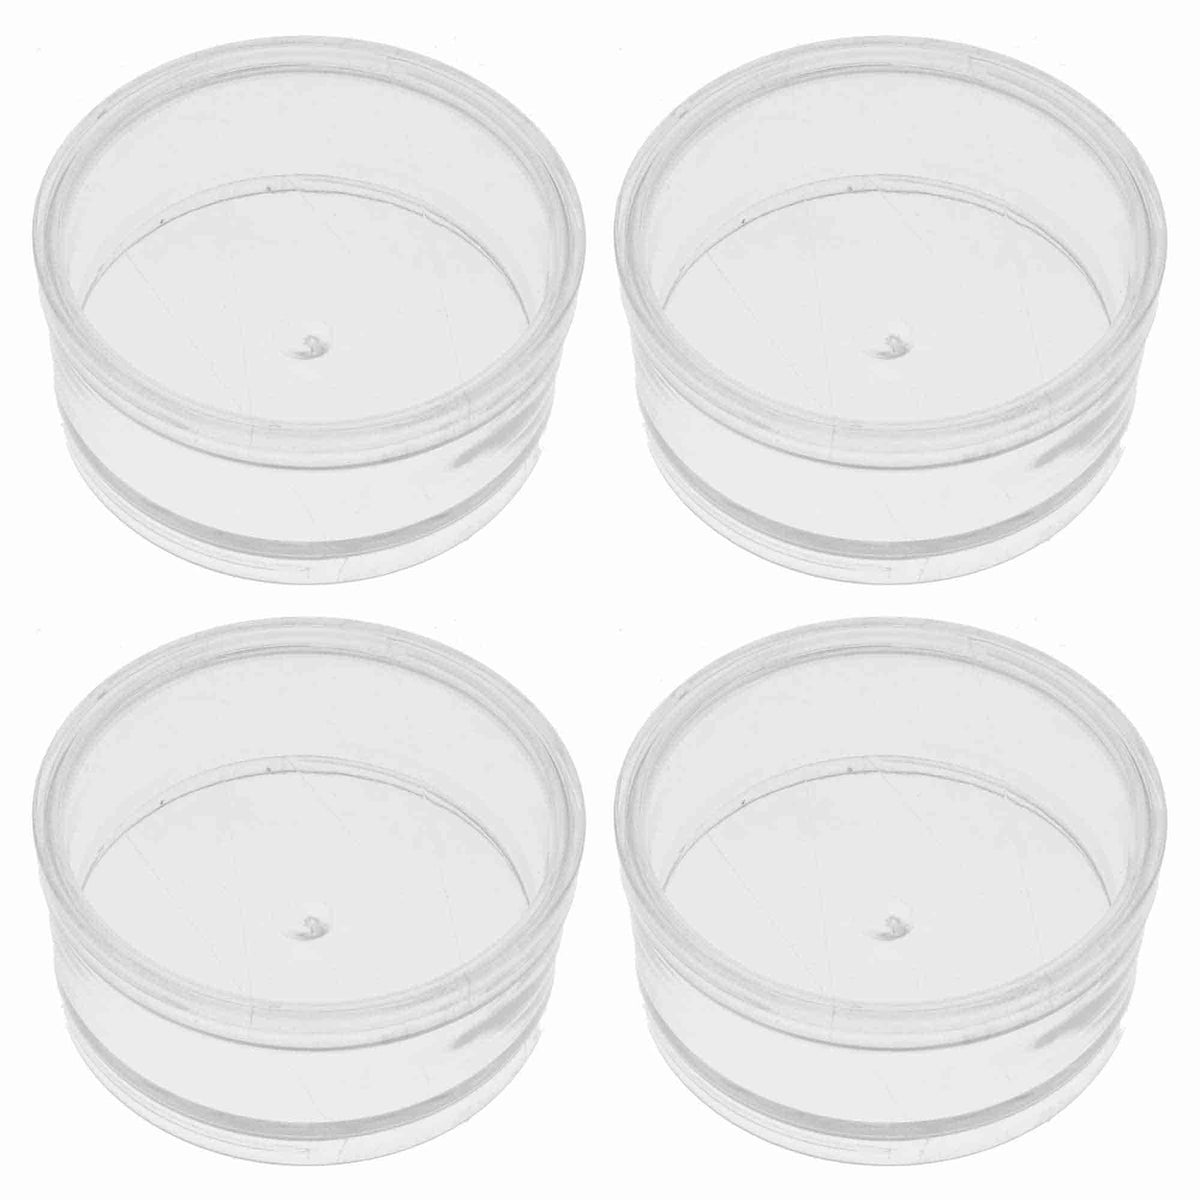 SE 87440BB Clear Round Plastic Storage Containers with Screw-On Lids (Set of 12)